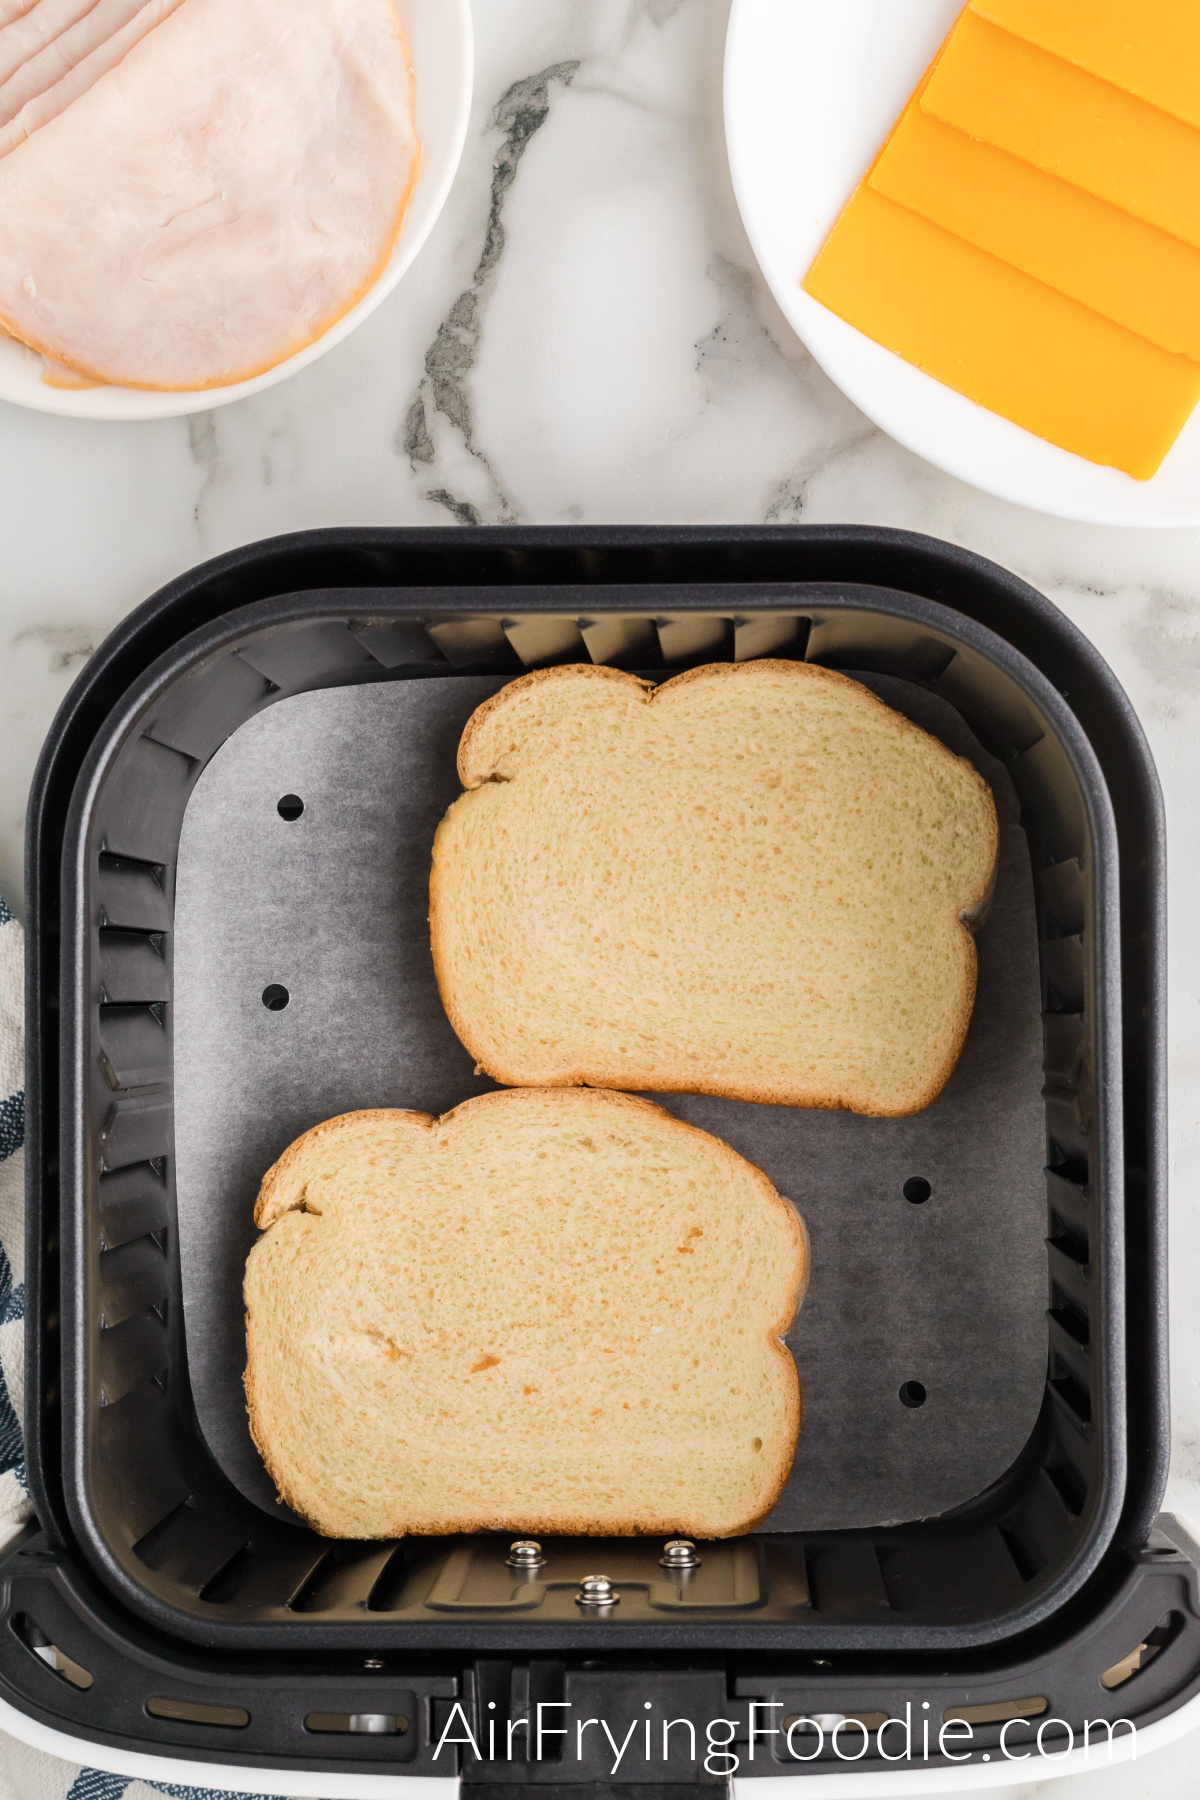 Air fryer basket with two slices of white bread with the butter side down. In the top left of the picture is a small white plate of turkey and a small white plate of cheese is in the top right of the image.